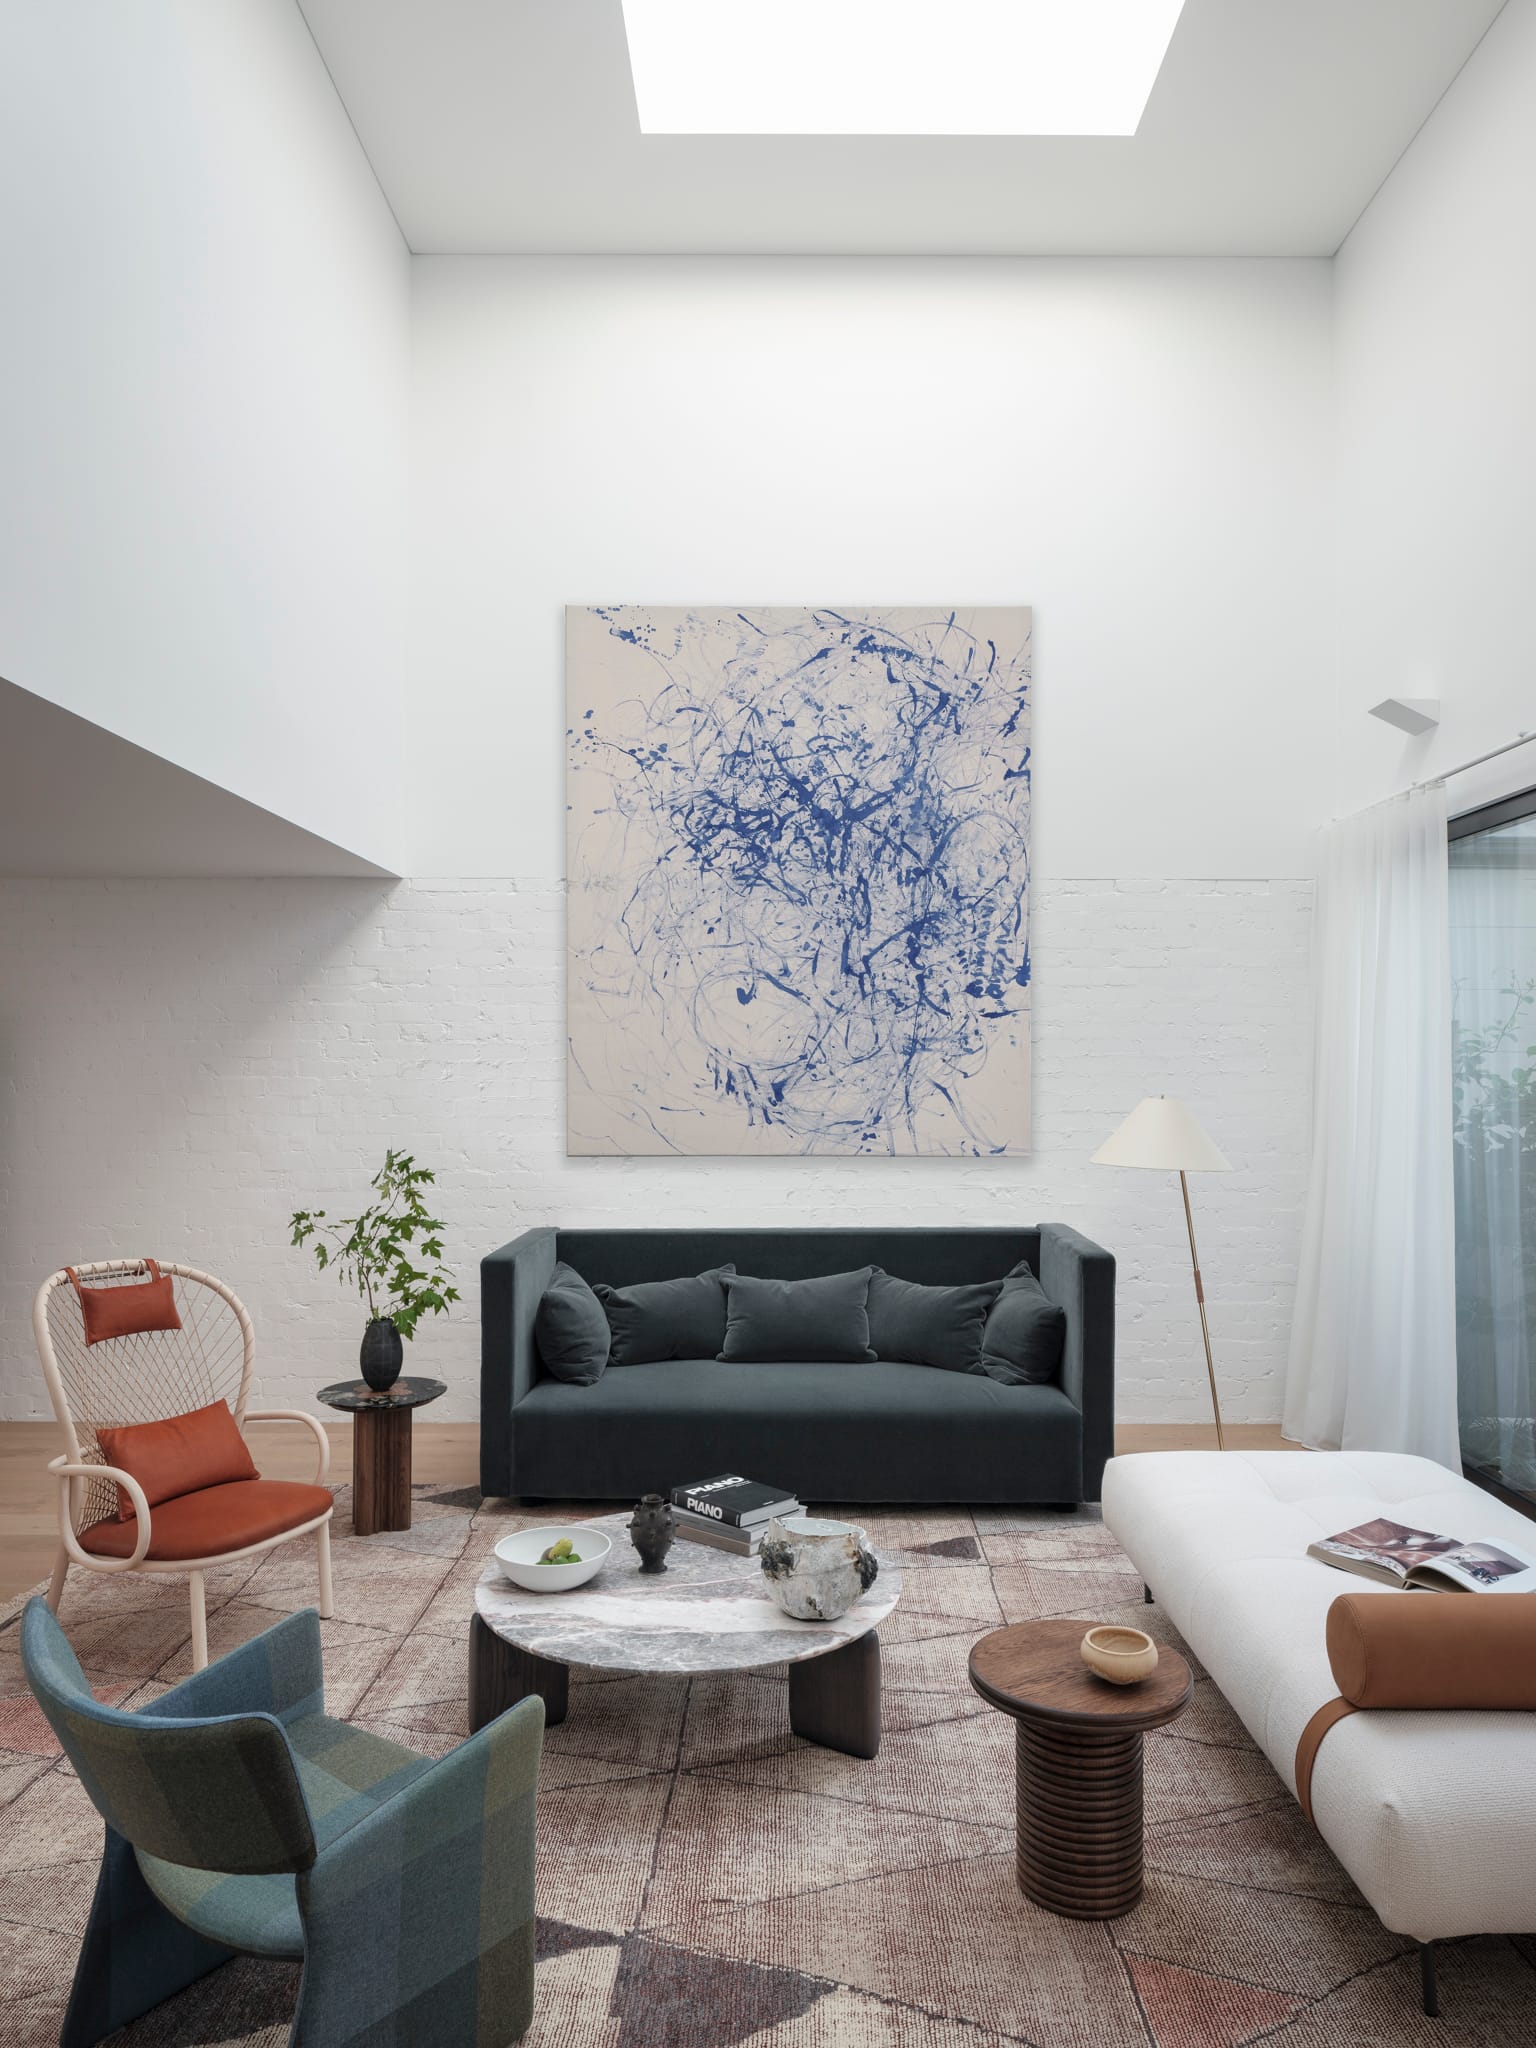 Bellevue House by Carla Middleton Architects. Photography by Tom Ferguson. Living room with overhead void and skylight. White brick wall with abstract artwork. Assorted armchairs and couches. 